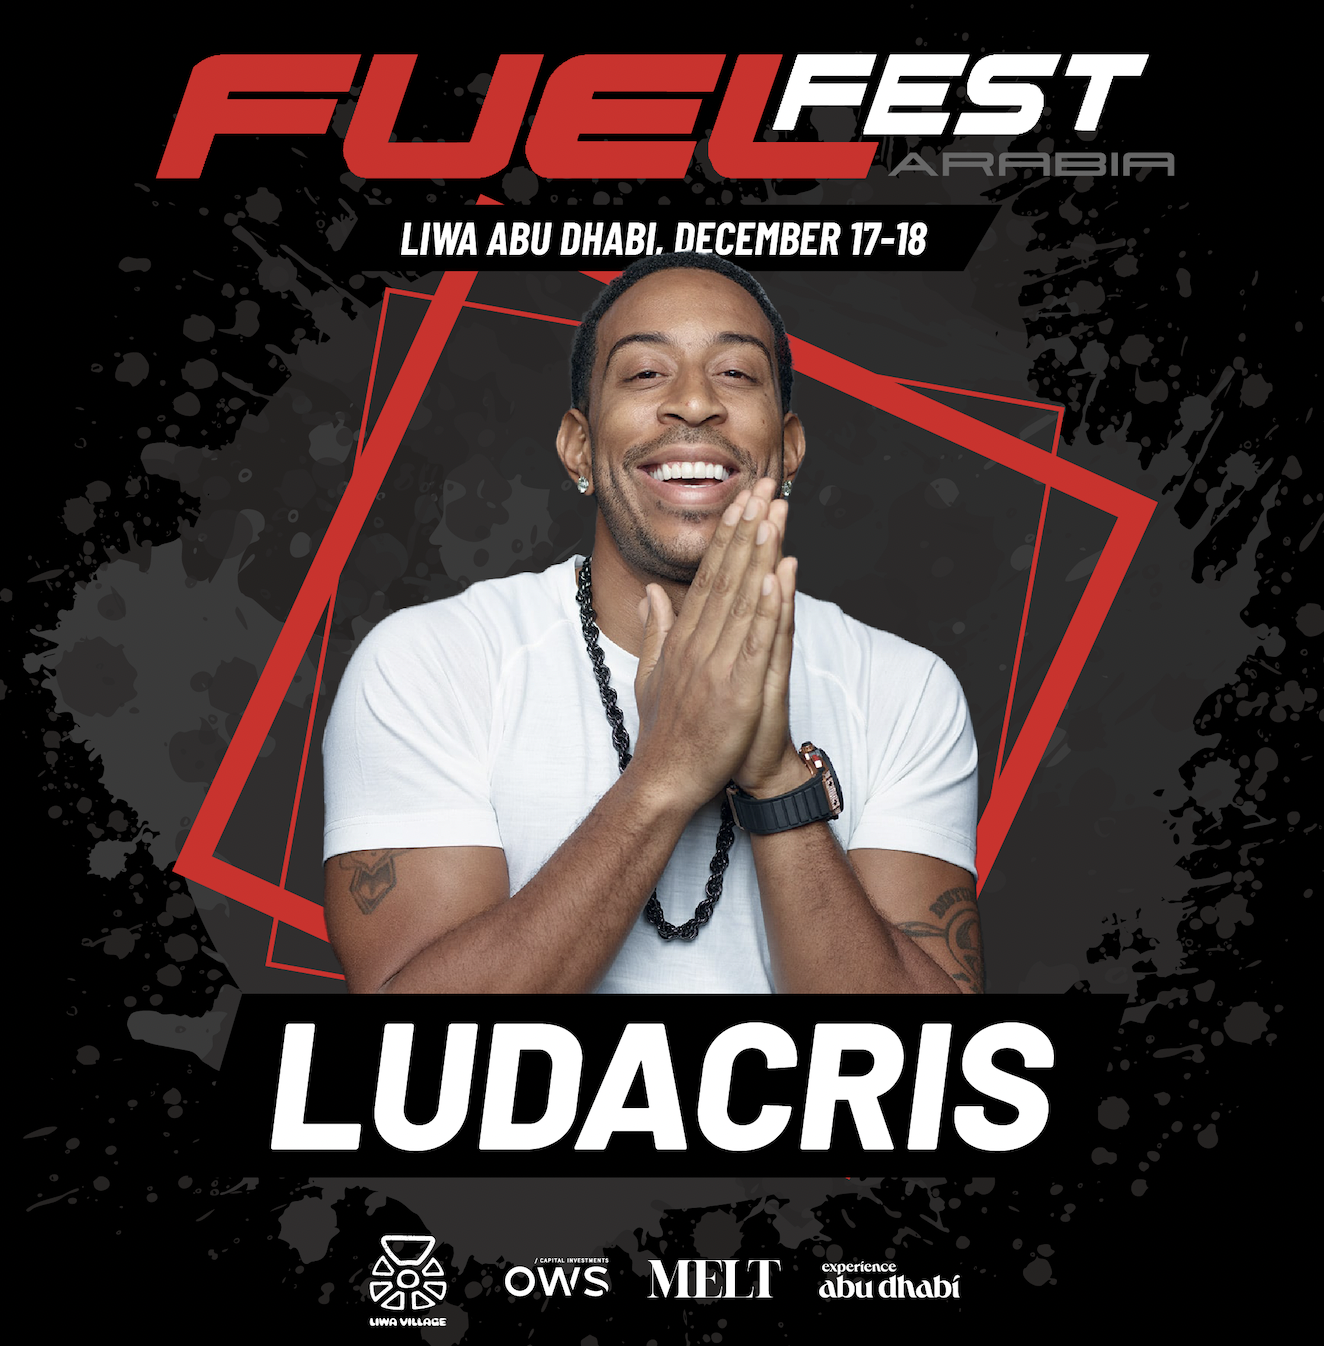 Liwa Village Presents FuelFest Arabia Featuring International Celebrities Cody Walker, Tyrese Gibson, And Ludacris On December 17th And 18th